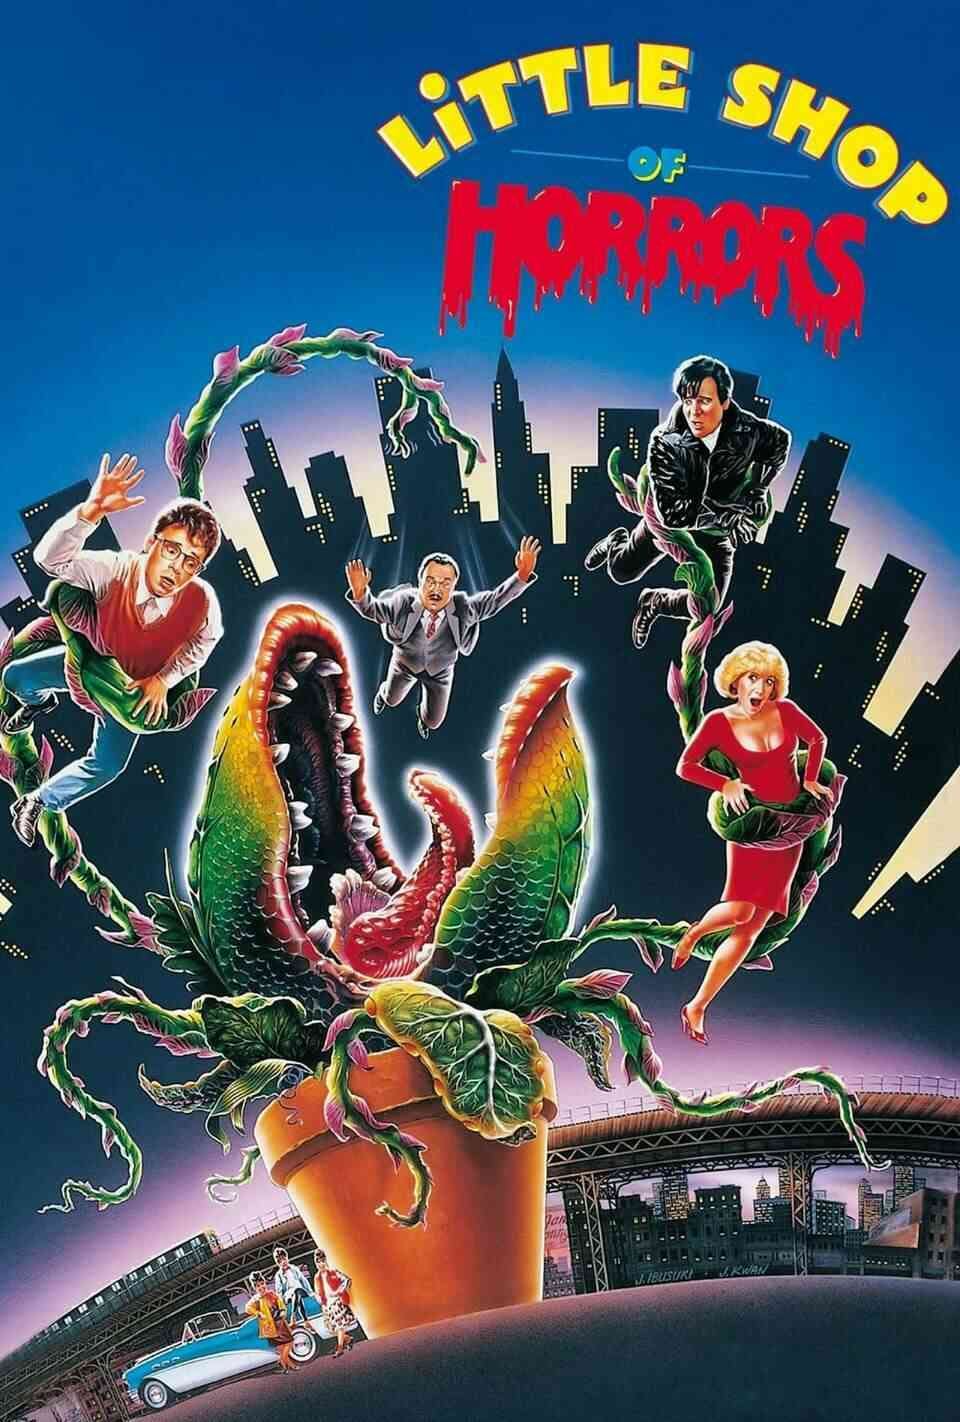 Read Little Shop of Horrors screenplay (poster)